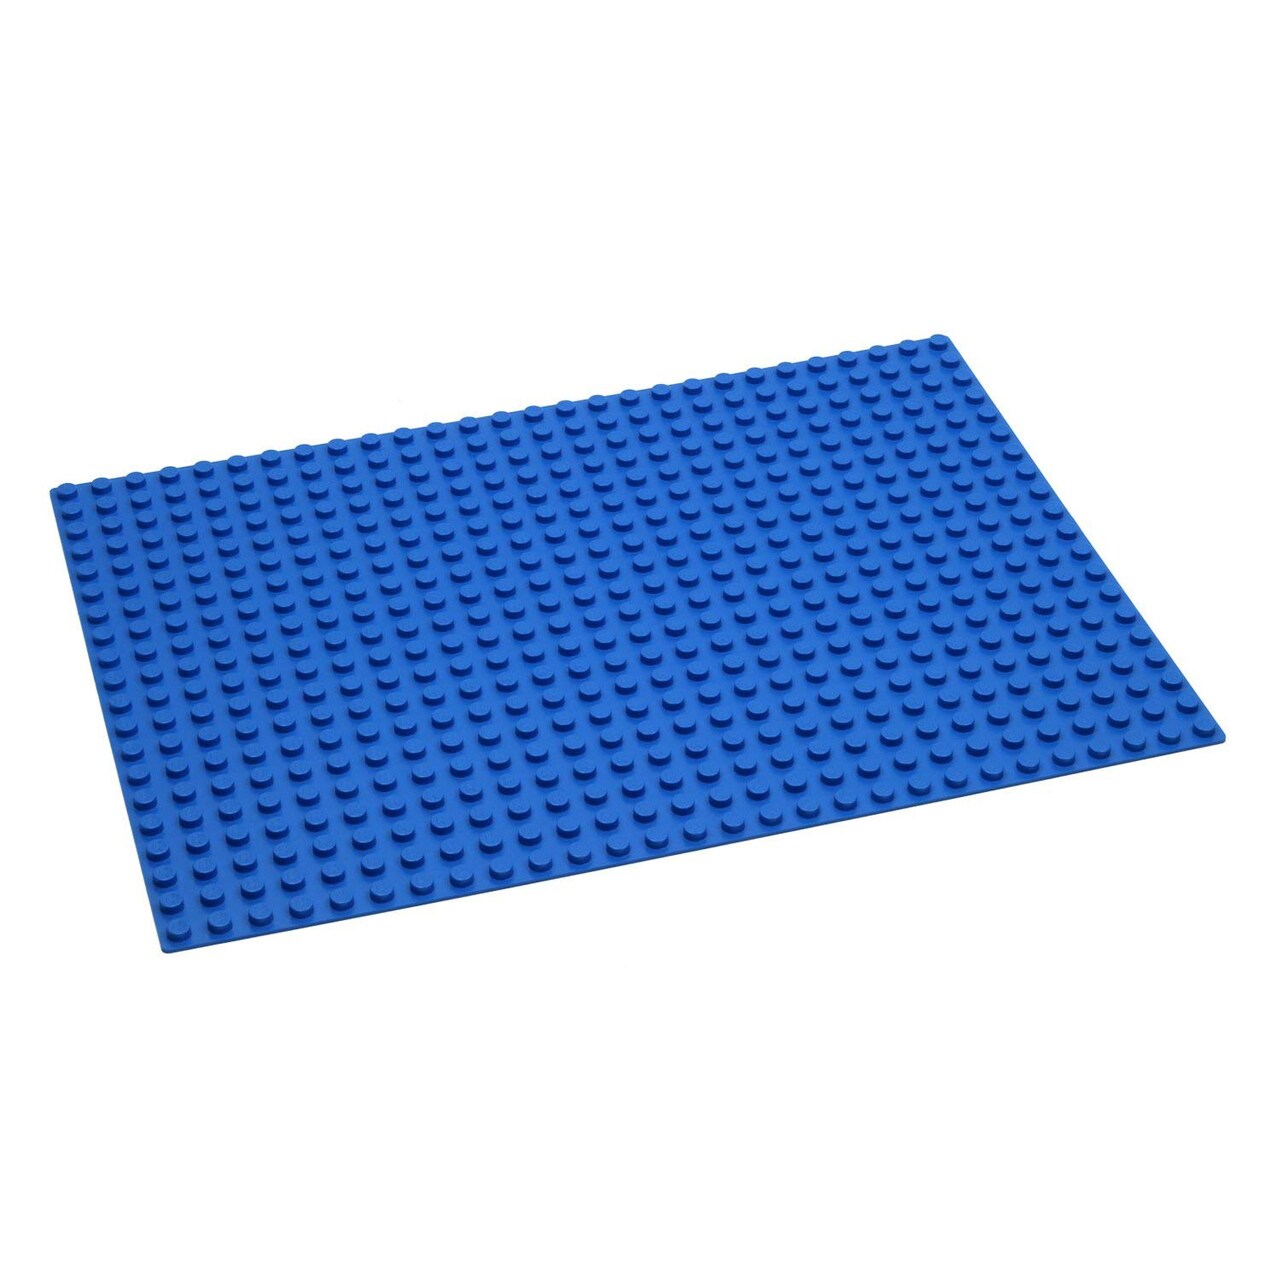 Hubelino 560 Base Plate Blue - Made in Germany - 12.9 x 17.6 Inches - 100% Compatible with Duplo